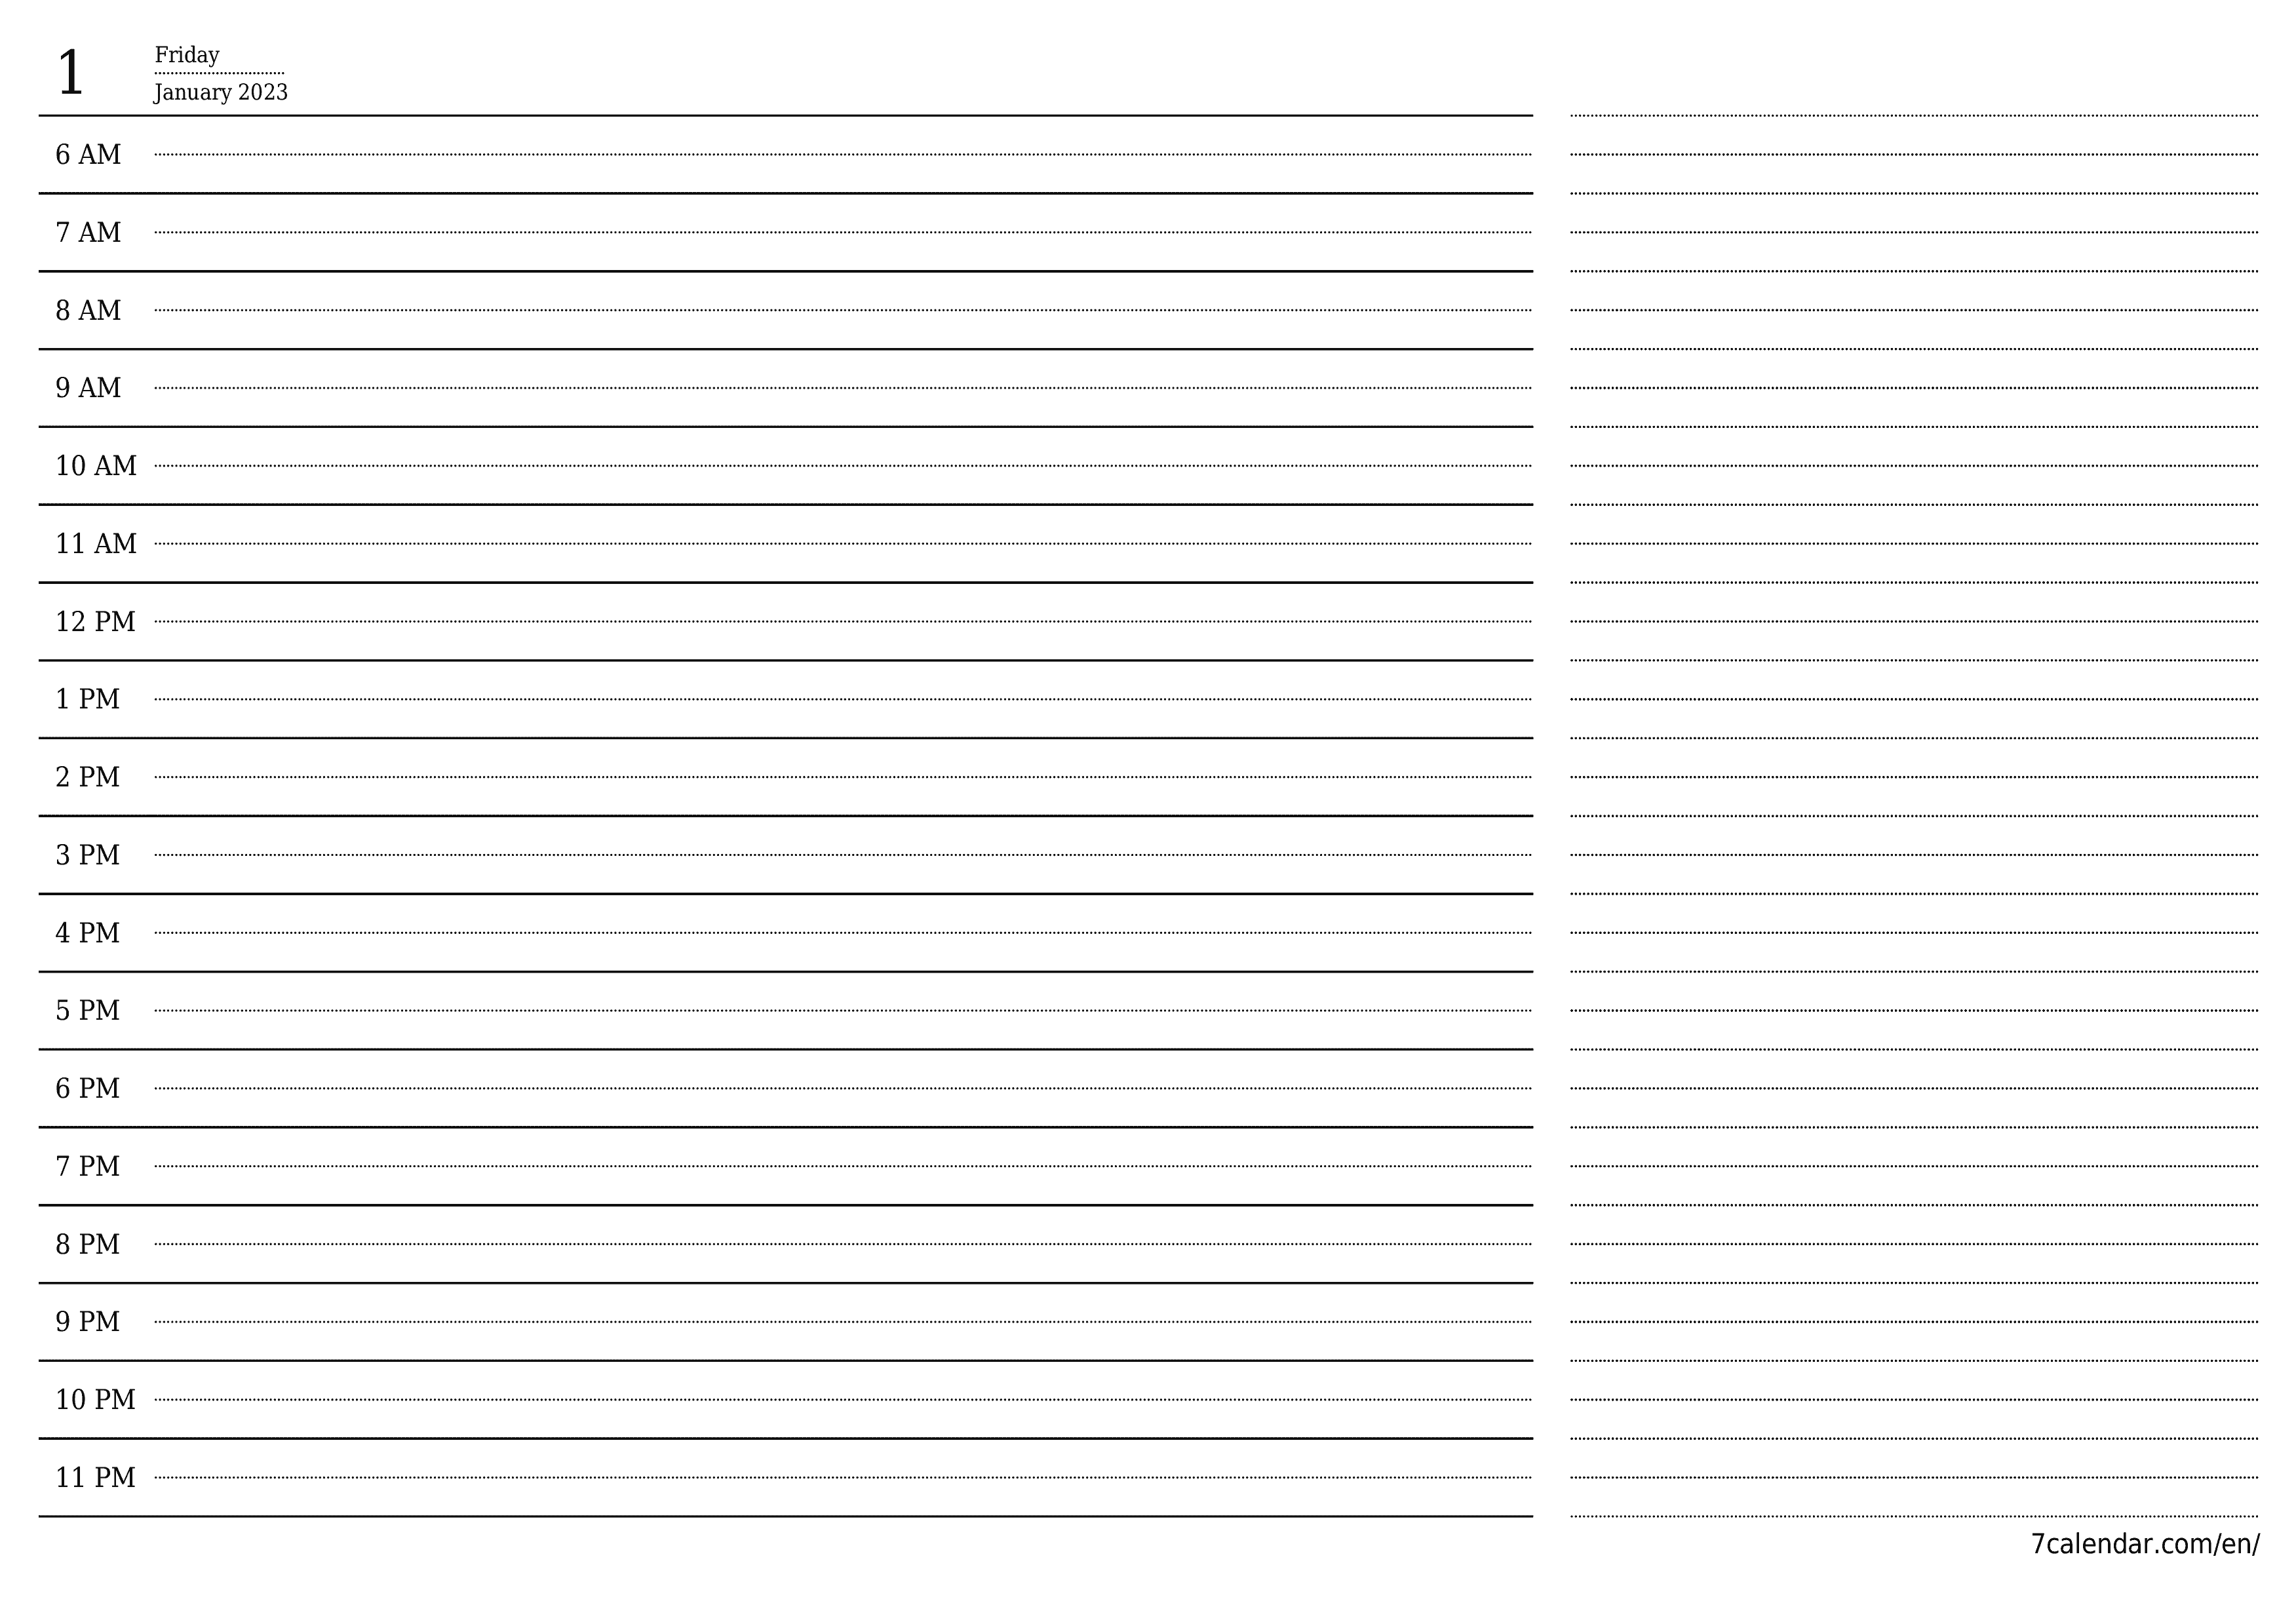 Blank daily printable calendar and planner for day January 2023 with notes, save and print to PDF PNG English - 7calendar.com